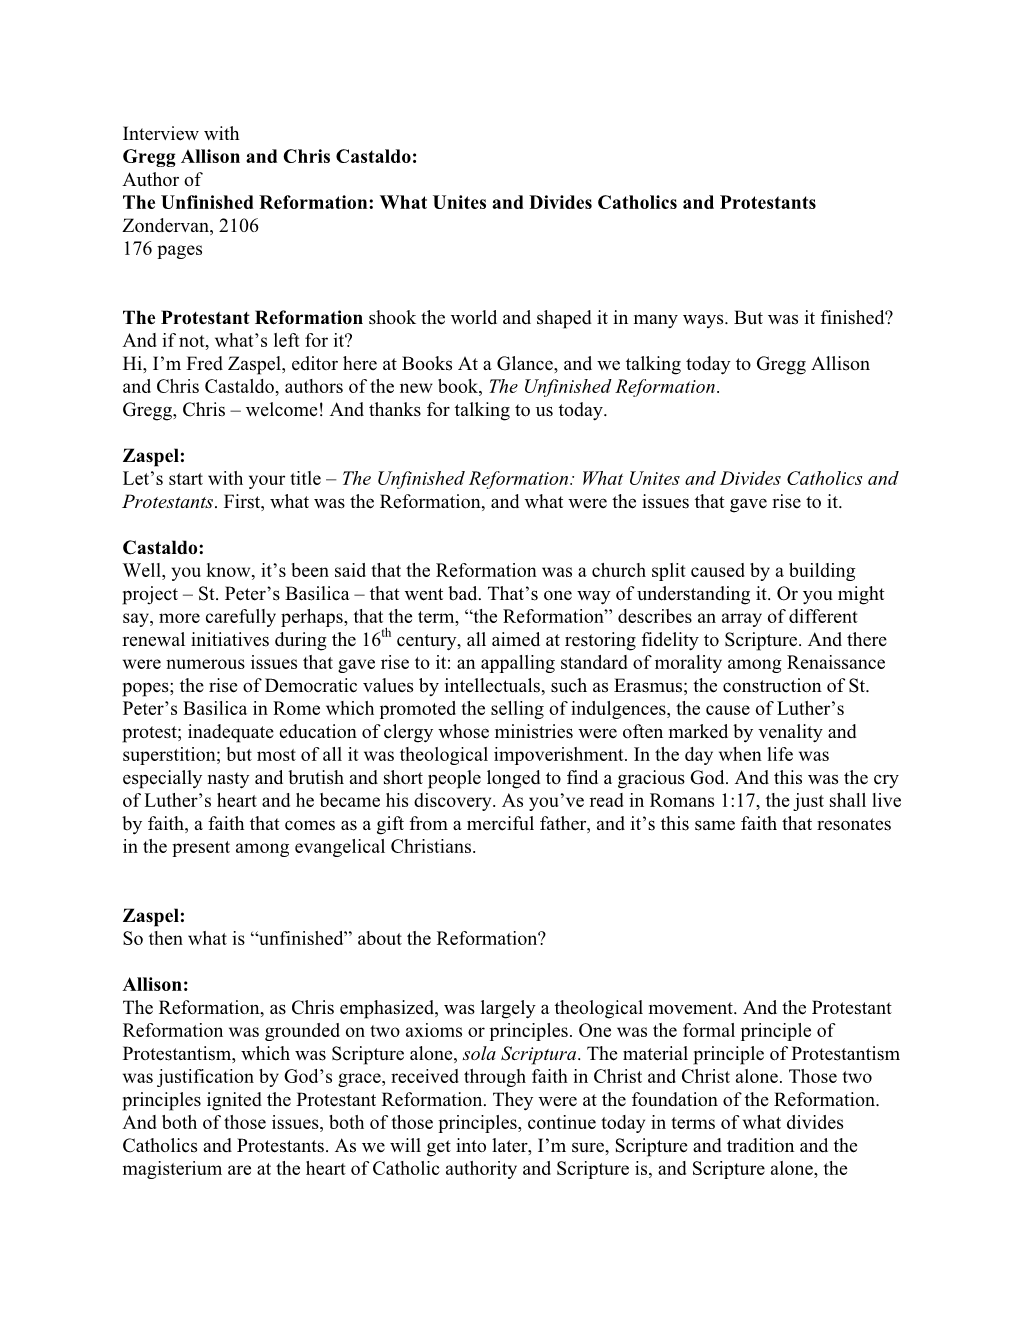 Interview with Gregg Allison and Chris Castaldo: Author of the Unfinished Reformation: What Unites and Divides Catholics and Protestants Zondervan, 2106 176 Pages